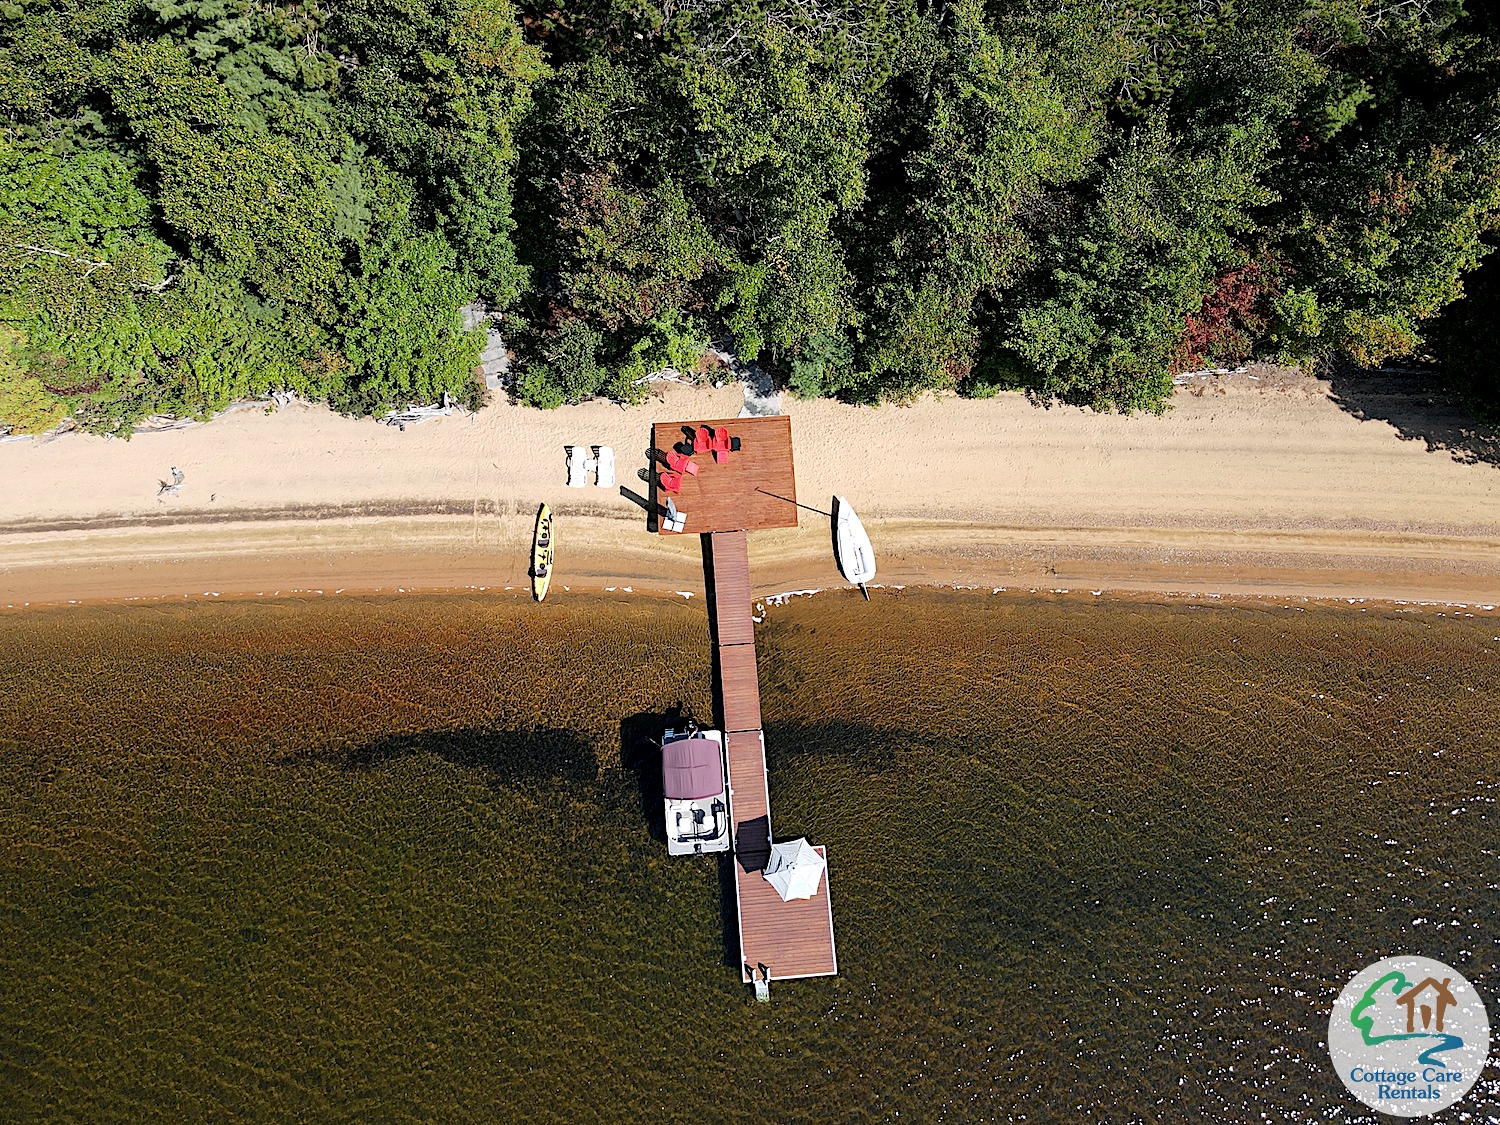 Oblong Beach House showing low lake level in September